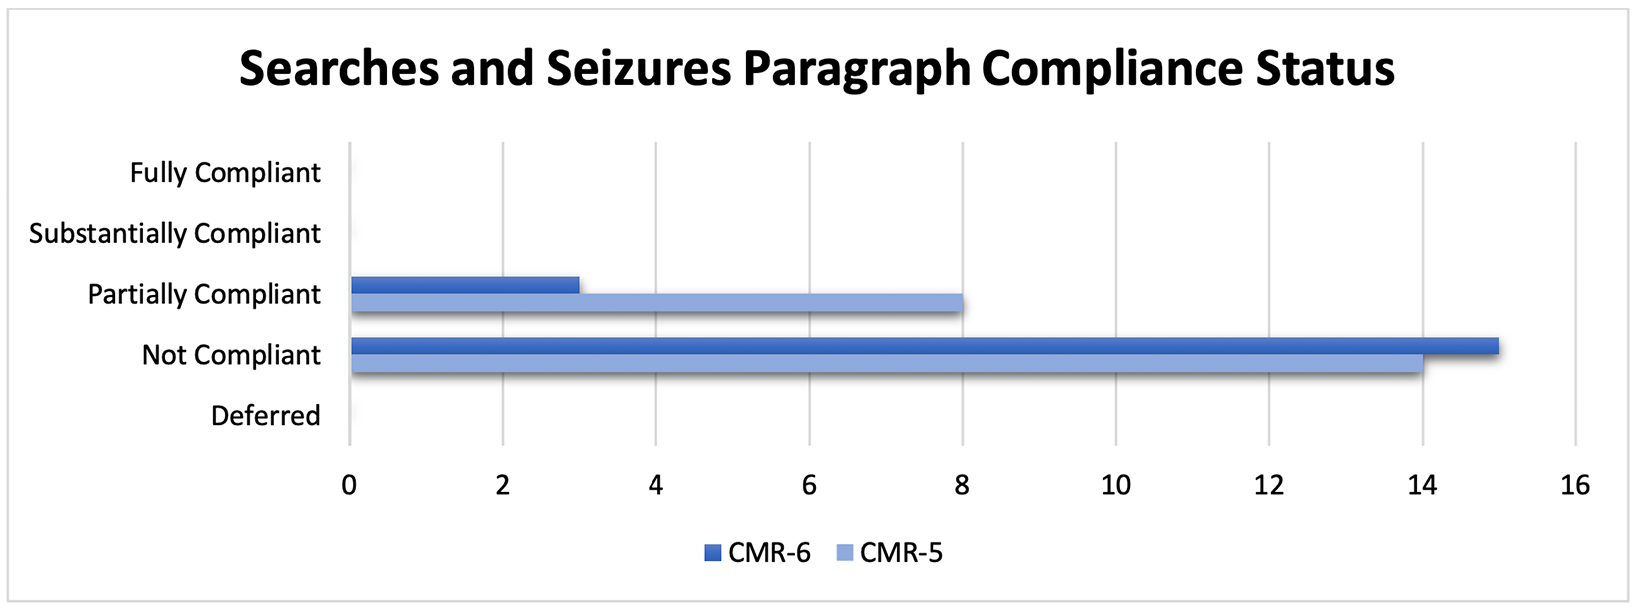 Figure 3. Searches and Seizures: Paragraph Compliance Status